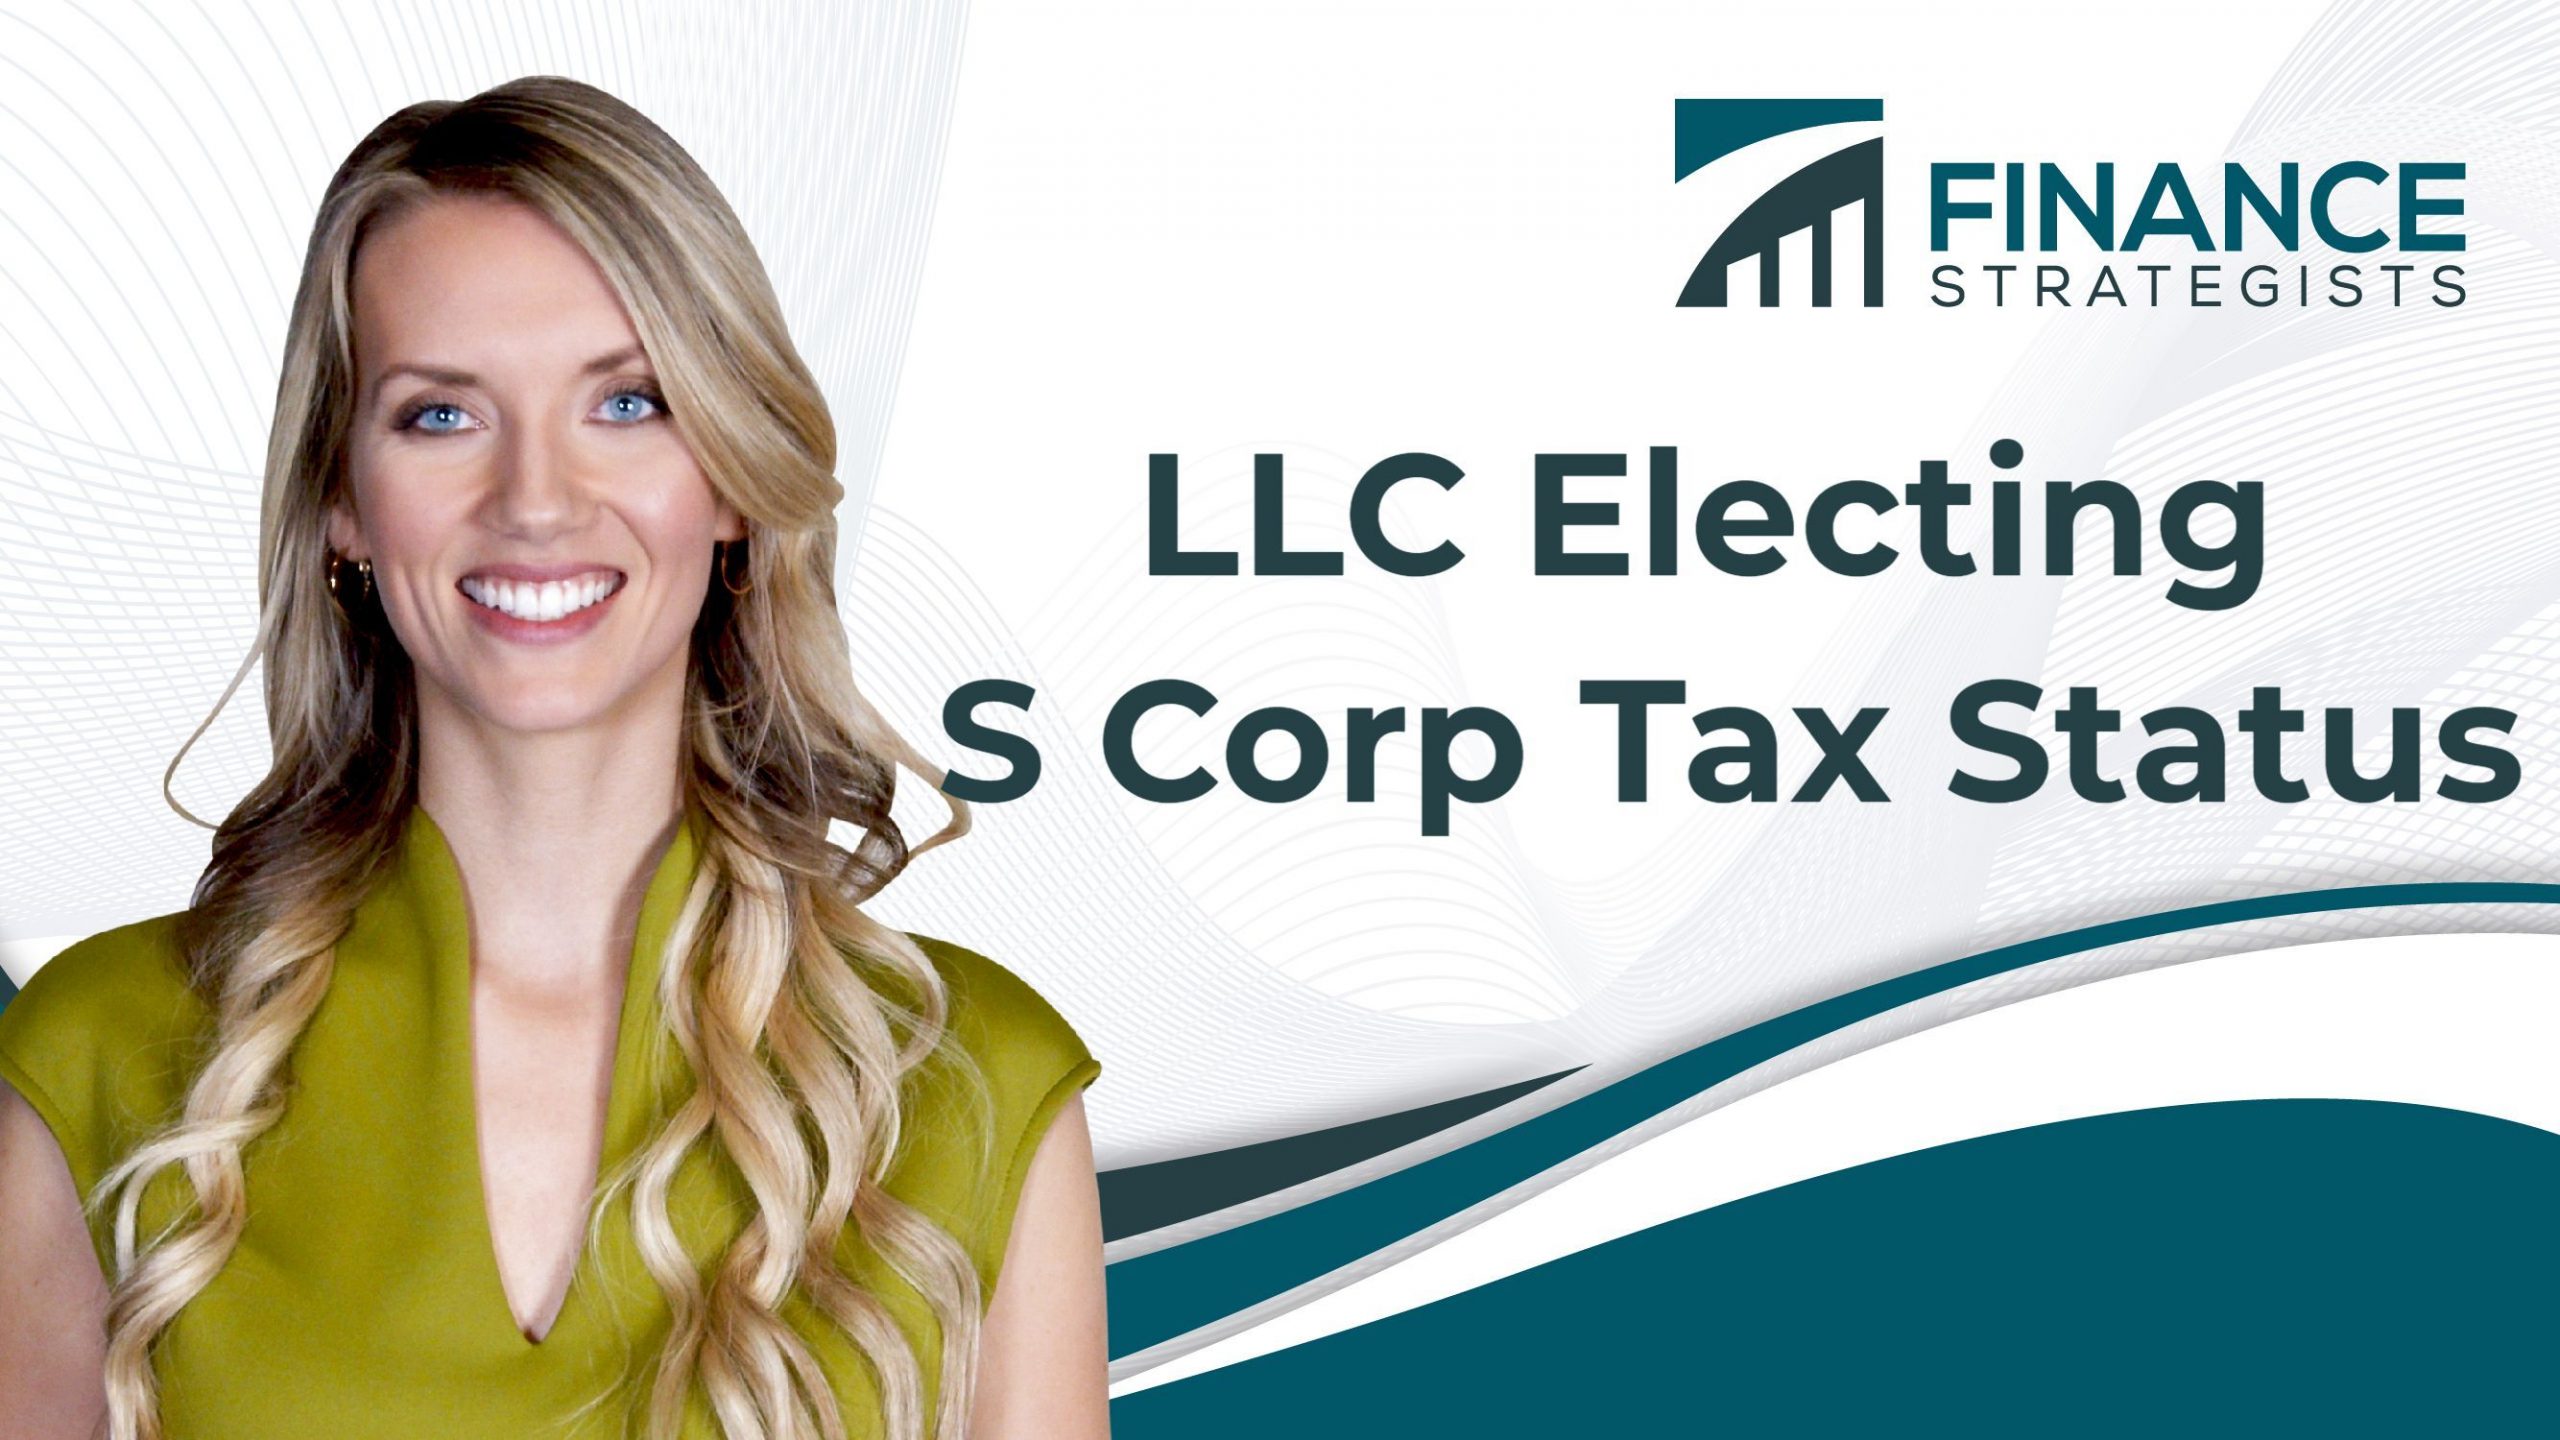 Maximizing LLC Tax Benefits Can You Save By Electing S Corp Status.jpg